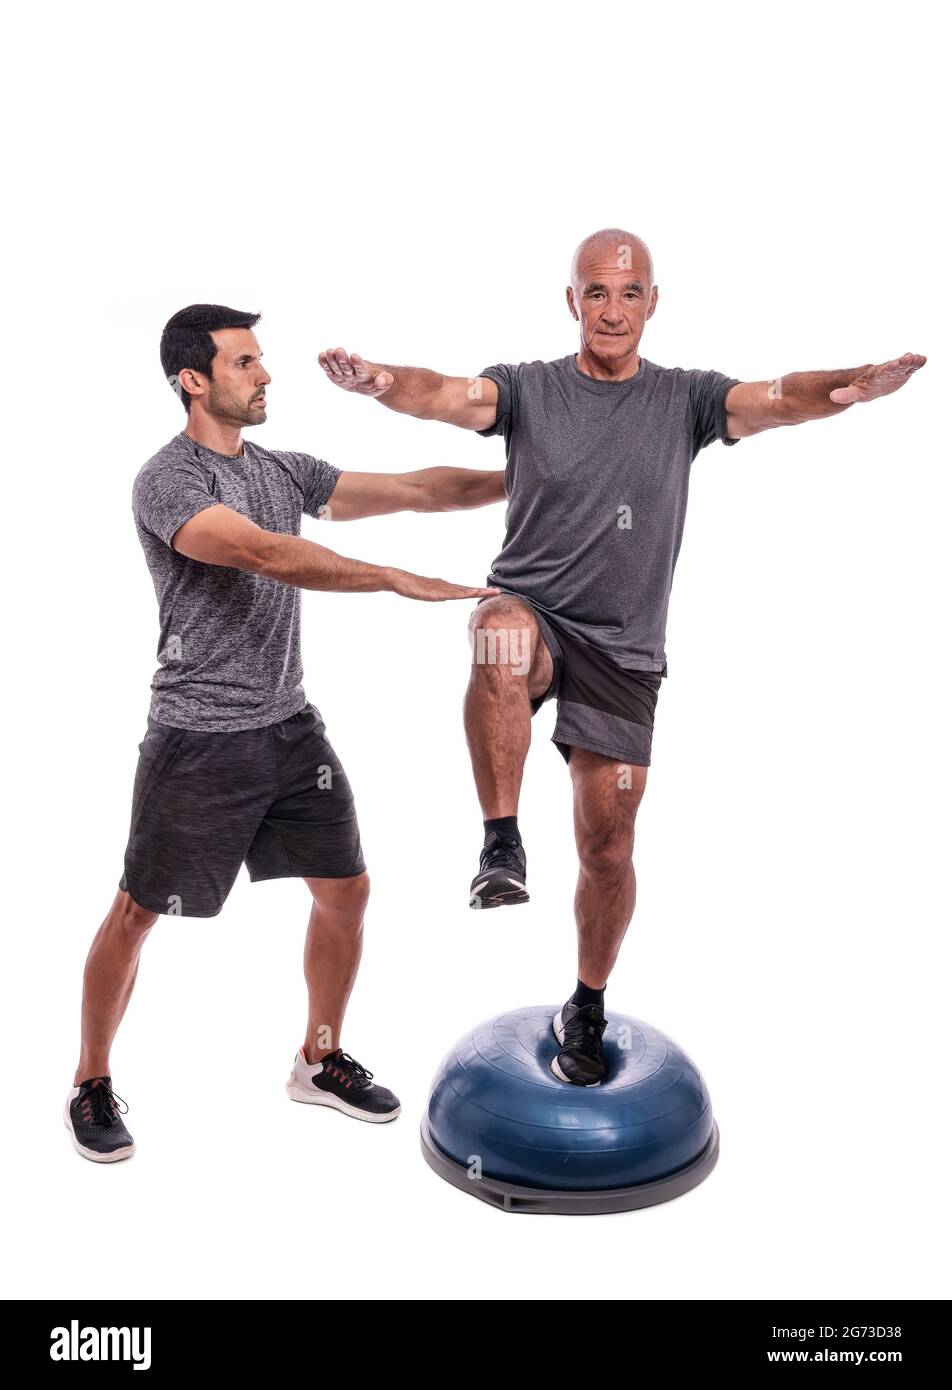 An elderly man doing a balance exercise, on one leg, on a hemisphere ball. With help of a fitness trainer. On a white isolated background. Stock Photo